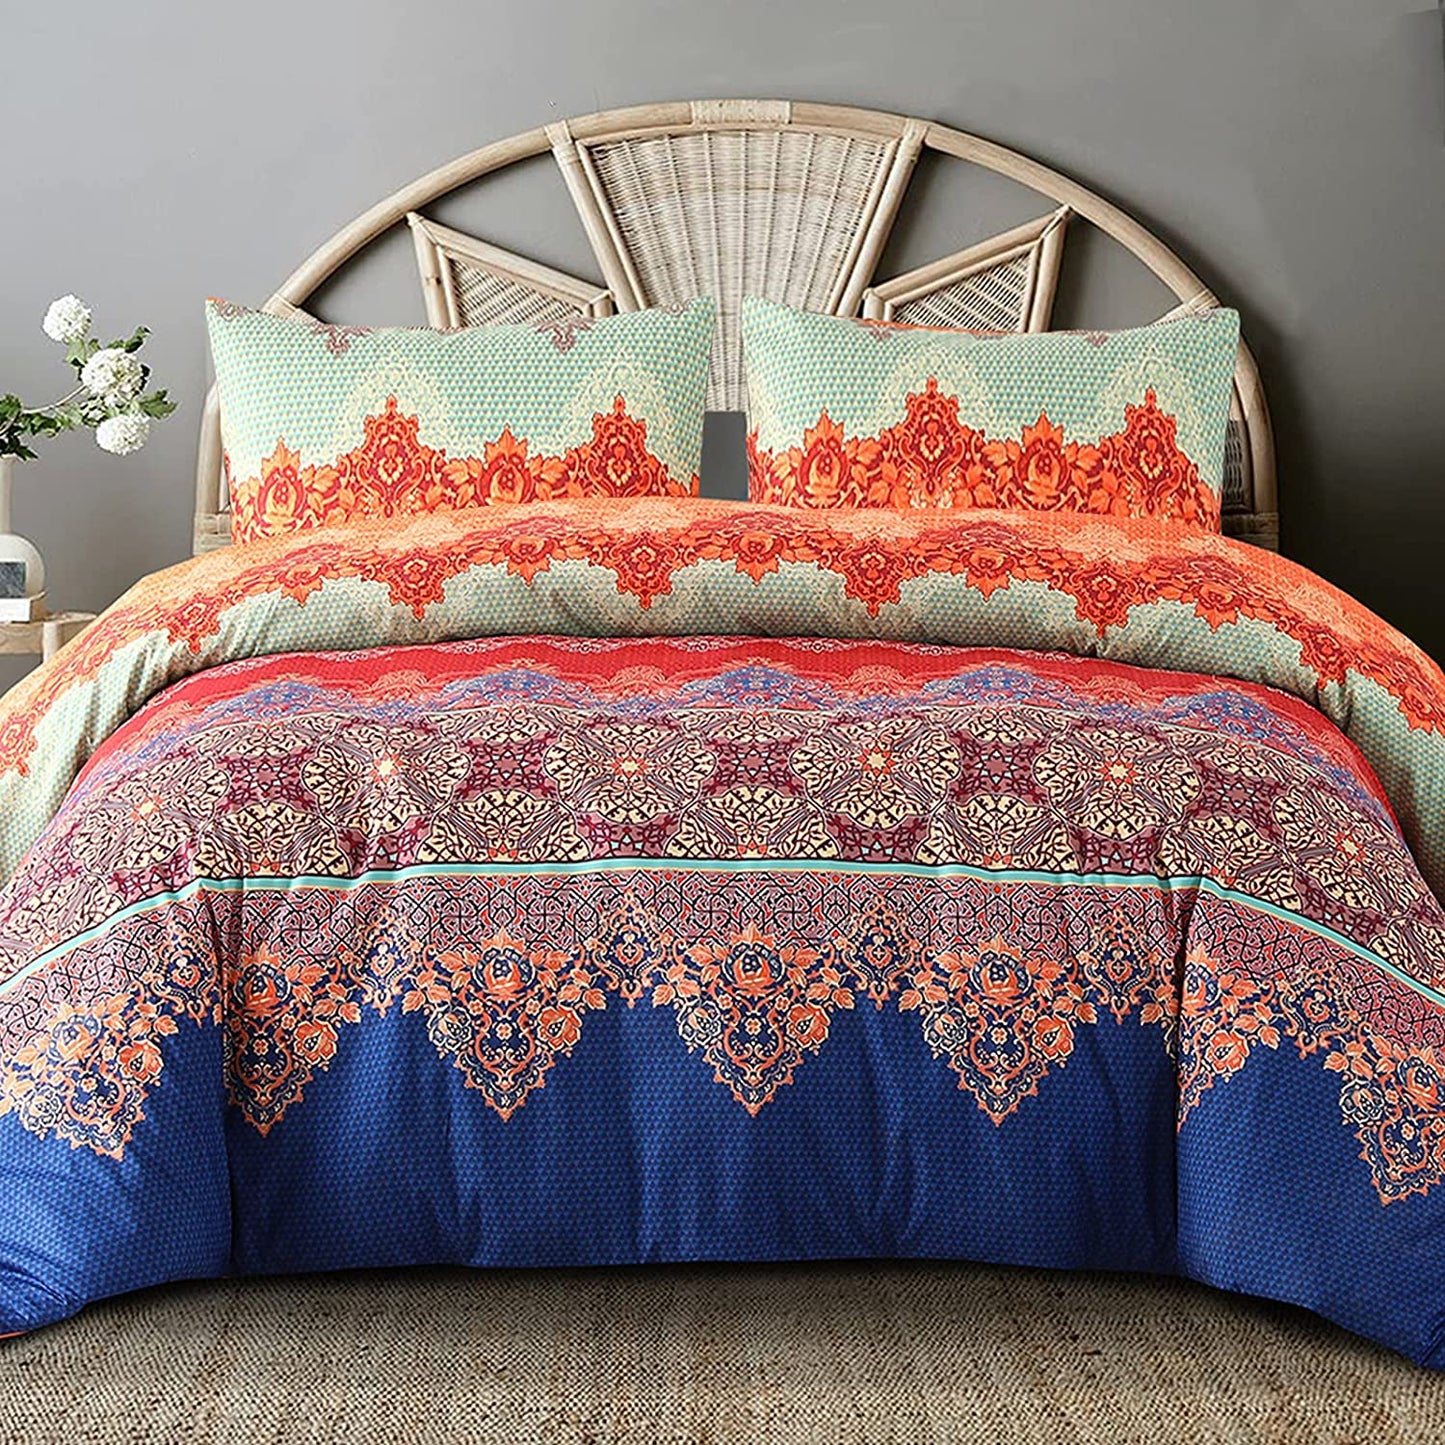 Exclusivo Mezcla Boho Bedding Duvet Cover Set, 3 Pieces Lightweight Comforter Cover with Pillow Shams (Twin Size，Orange and Blue)